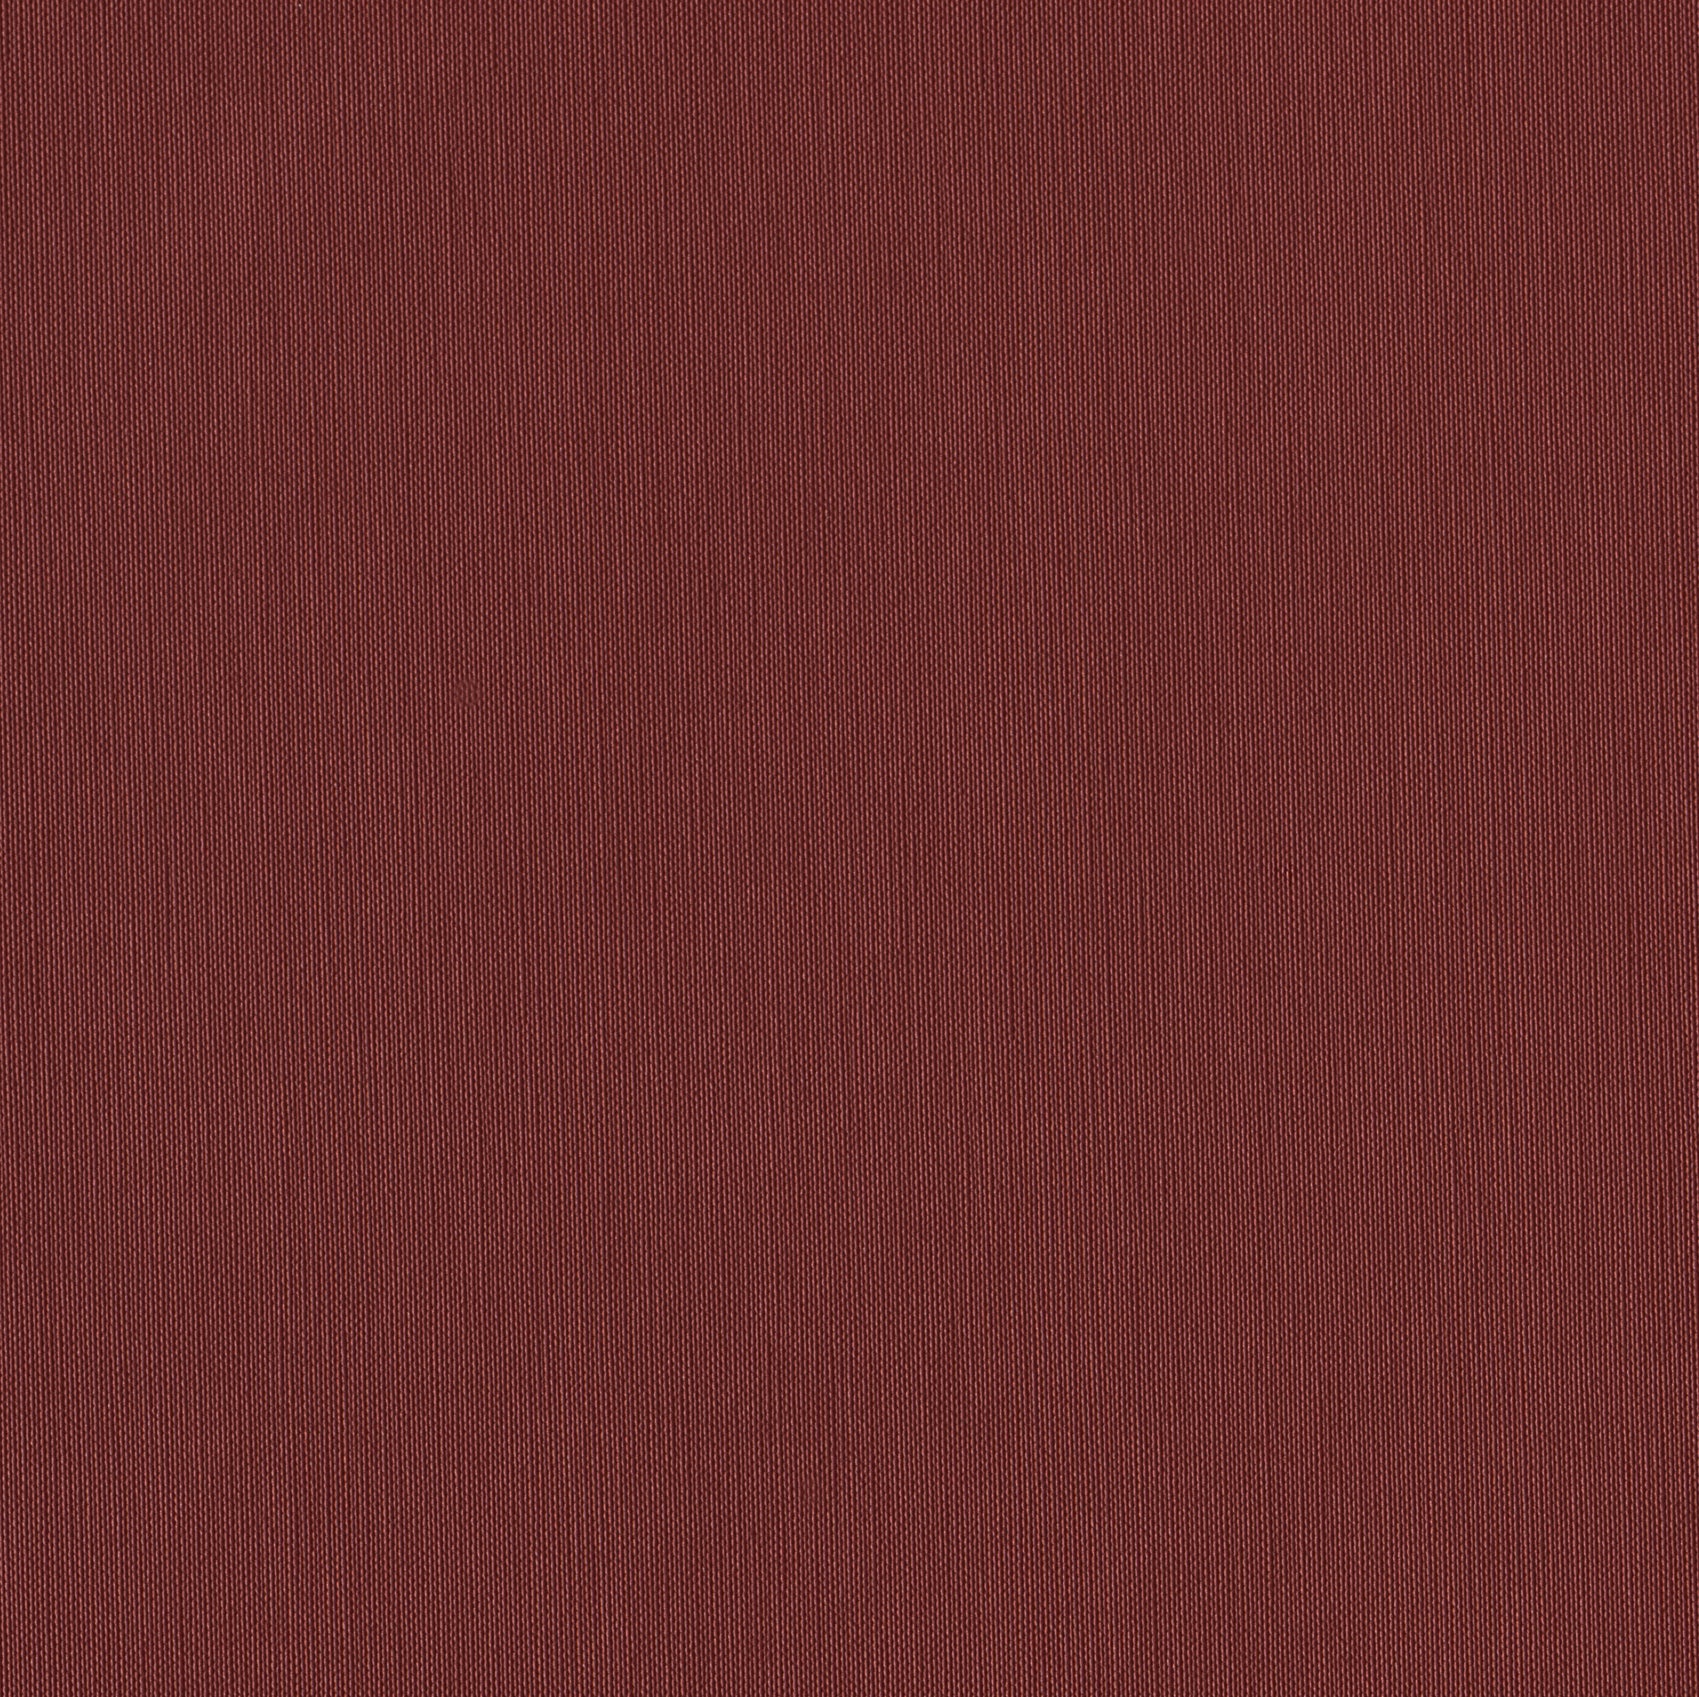    Andriali-Contract-Vinyl_Upholstery-Design-LegendFR-FR5-Color-275NewWine-Width-140cm